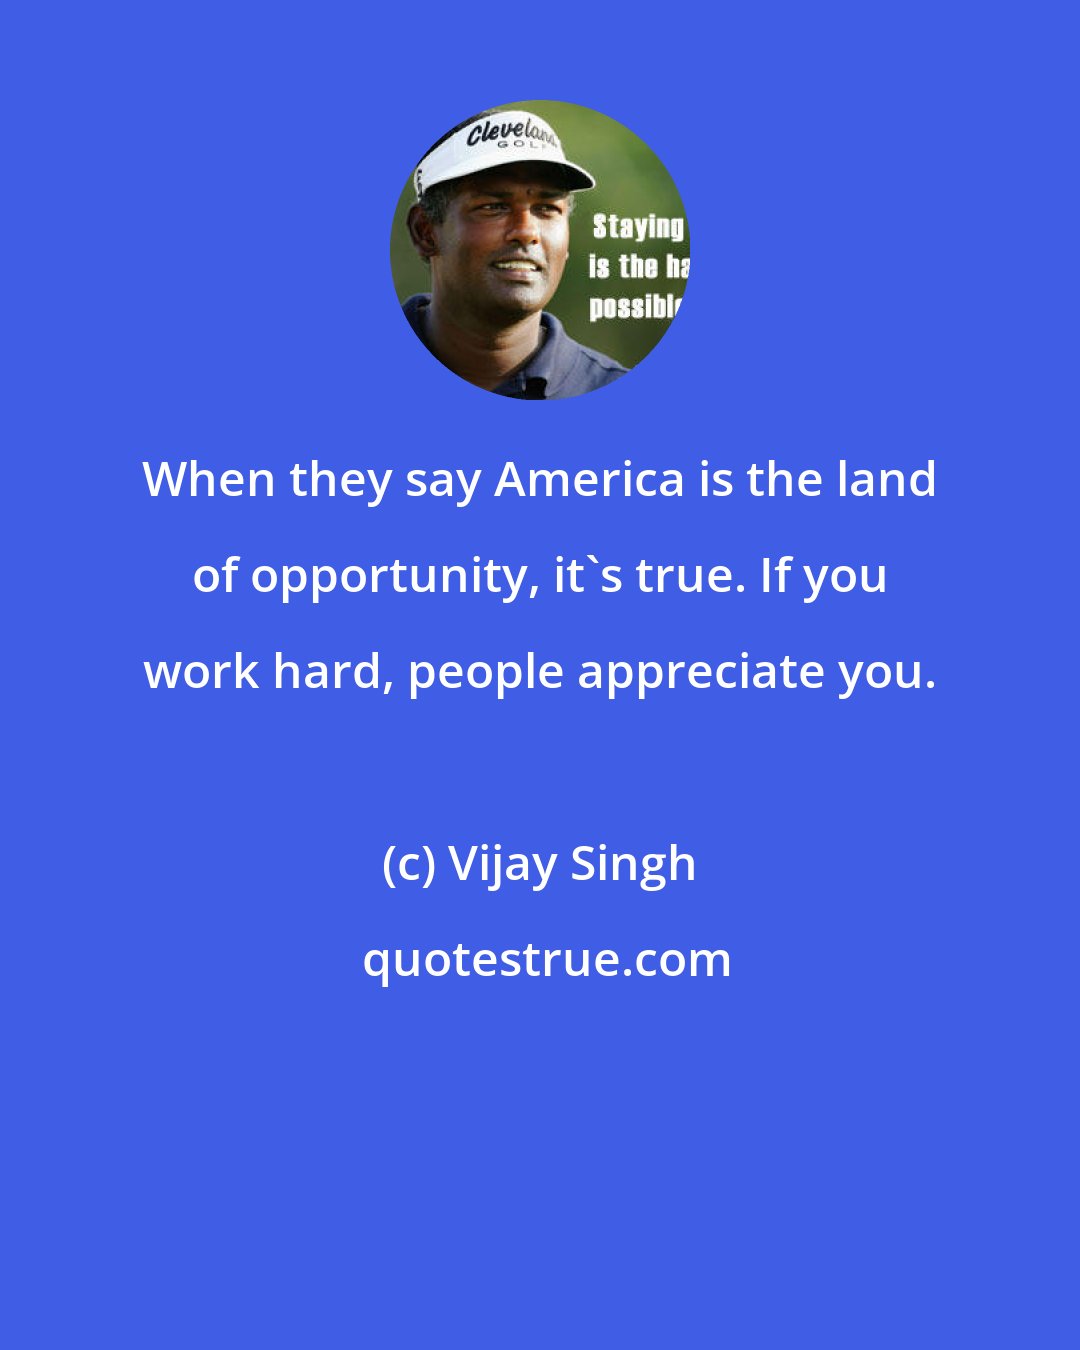 Vijay Singh: When they say America is the land of opportunity, it's true. If you work hard, people appreciate you.